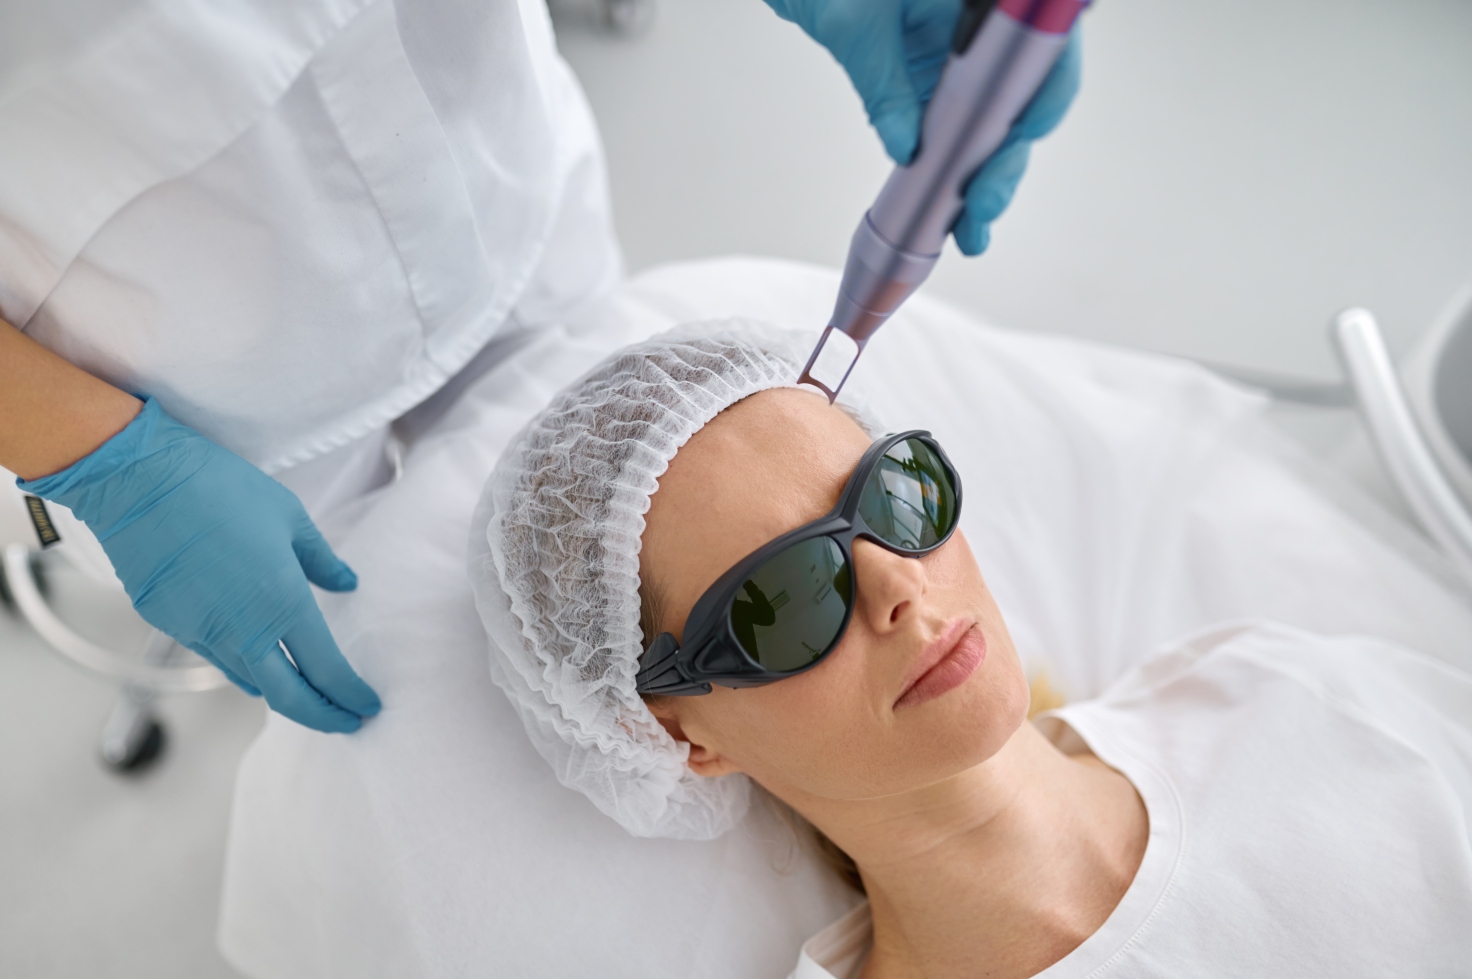 cosmetologist-preparing-client-for-facial-laser-ca-2022-12-03-22-29-08-utc-resized